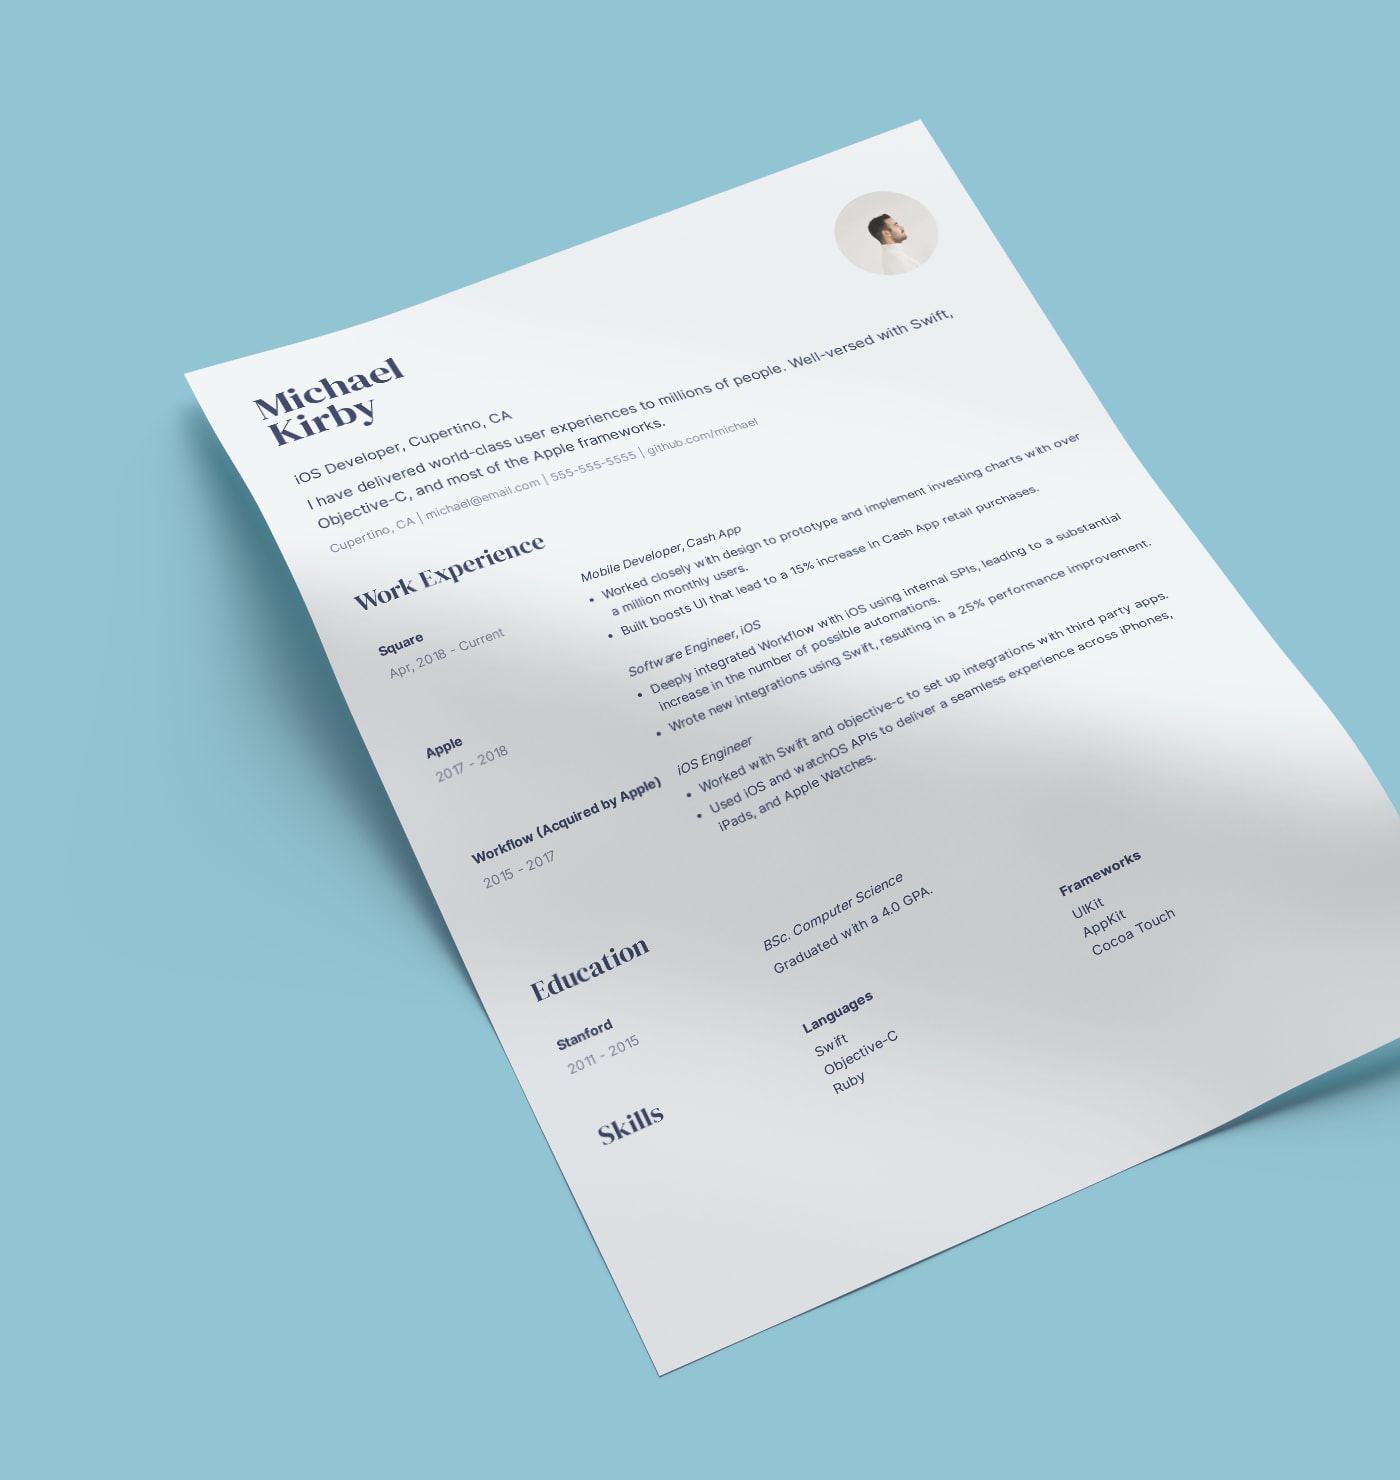 Seymore professional resume template created with Standard Resume builder.